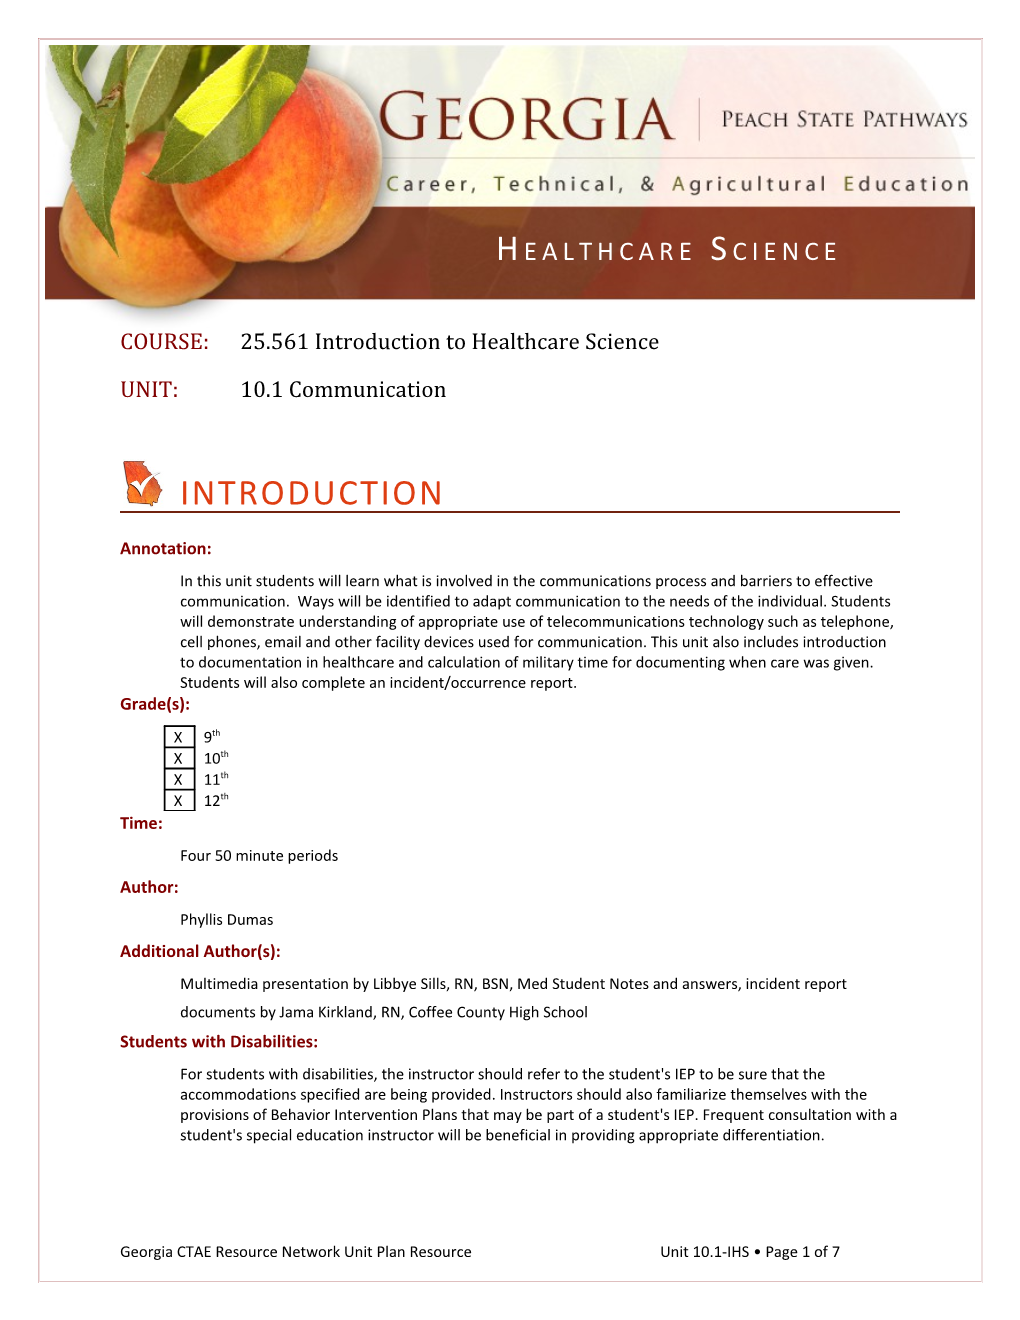 COURSE: 25.561 Introduction to Healthcare Science